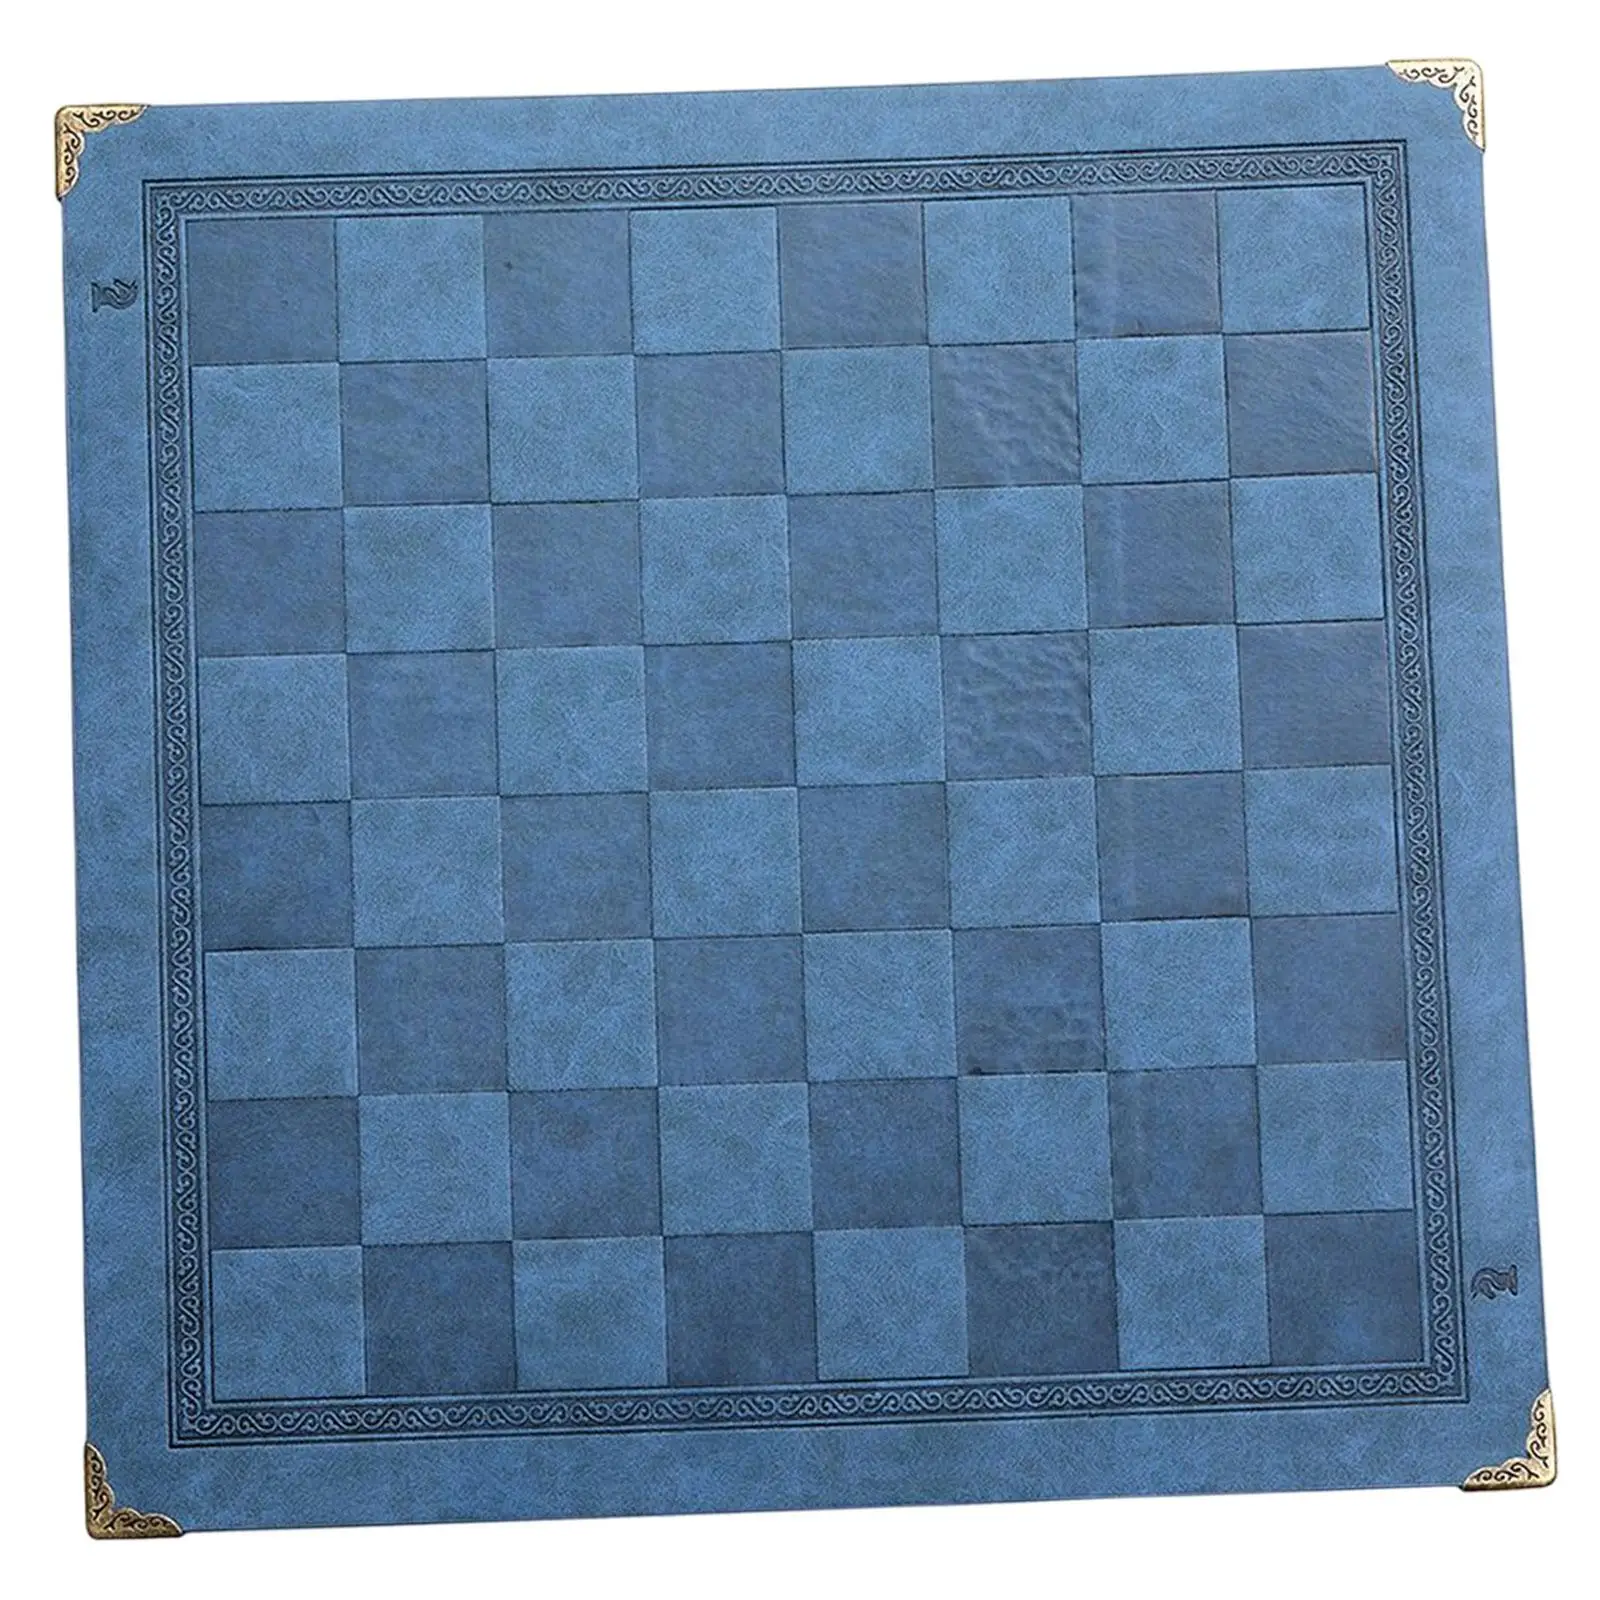 Chessboard Mat Heat Resistant Wipeable Antiskid PU Leather Portable Chess Pad Mat for Home chess park Game Counter Top